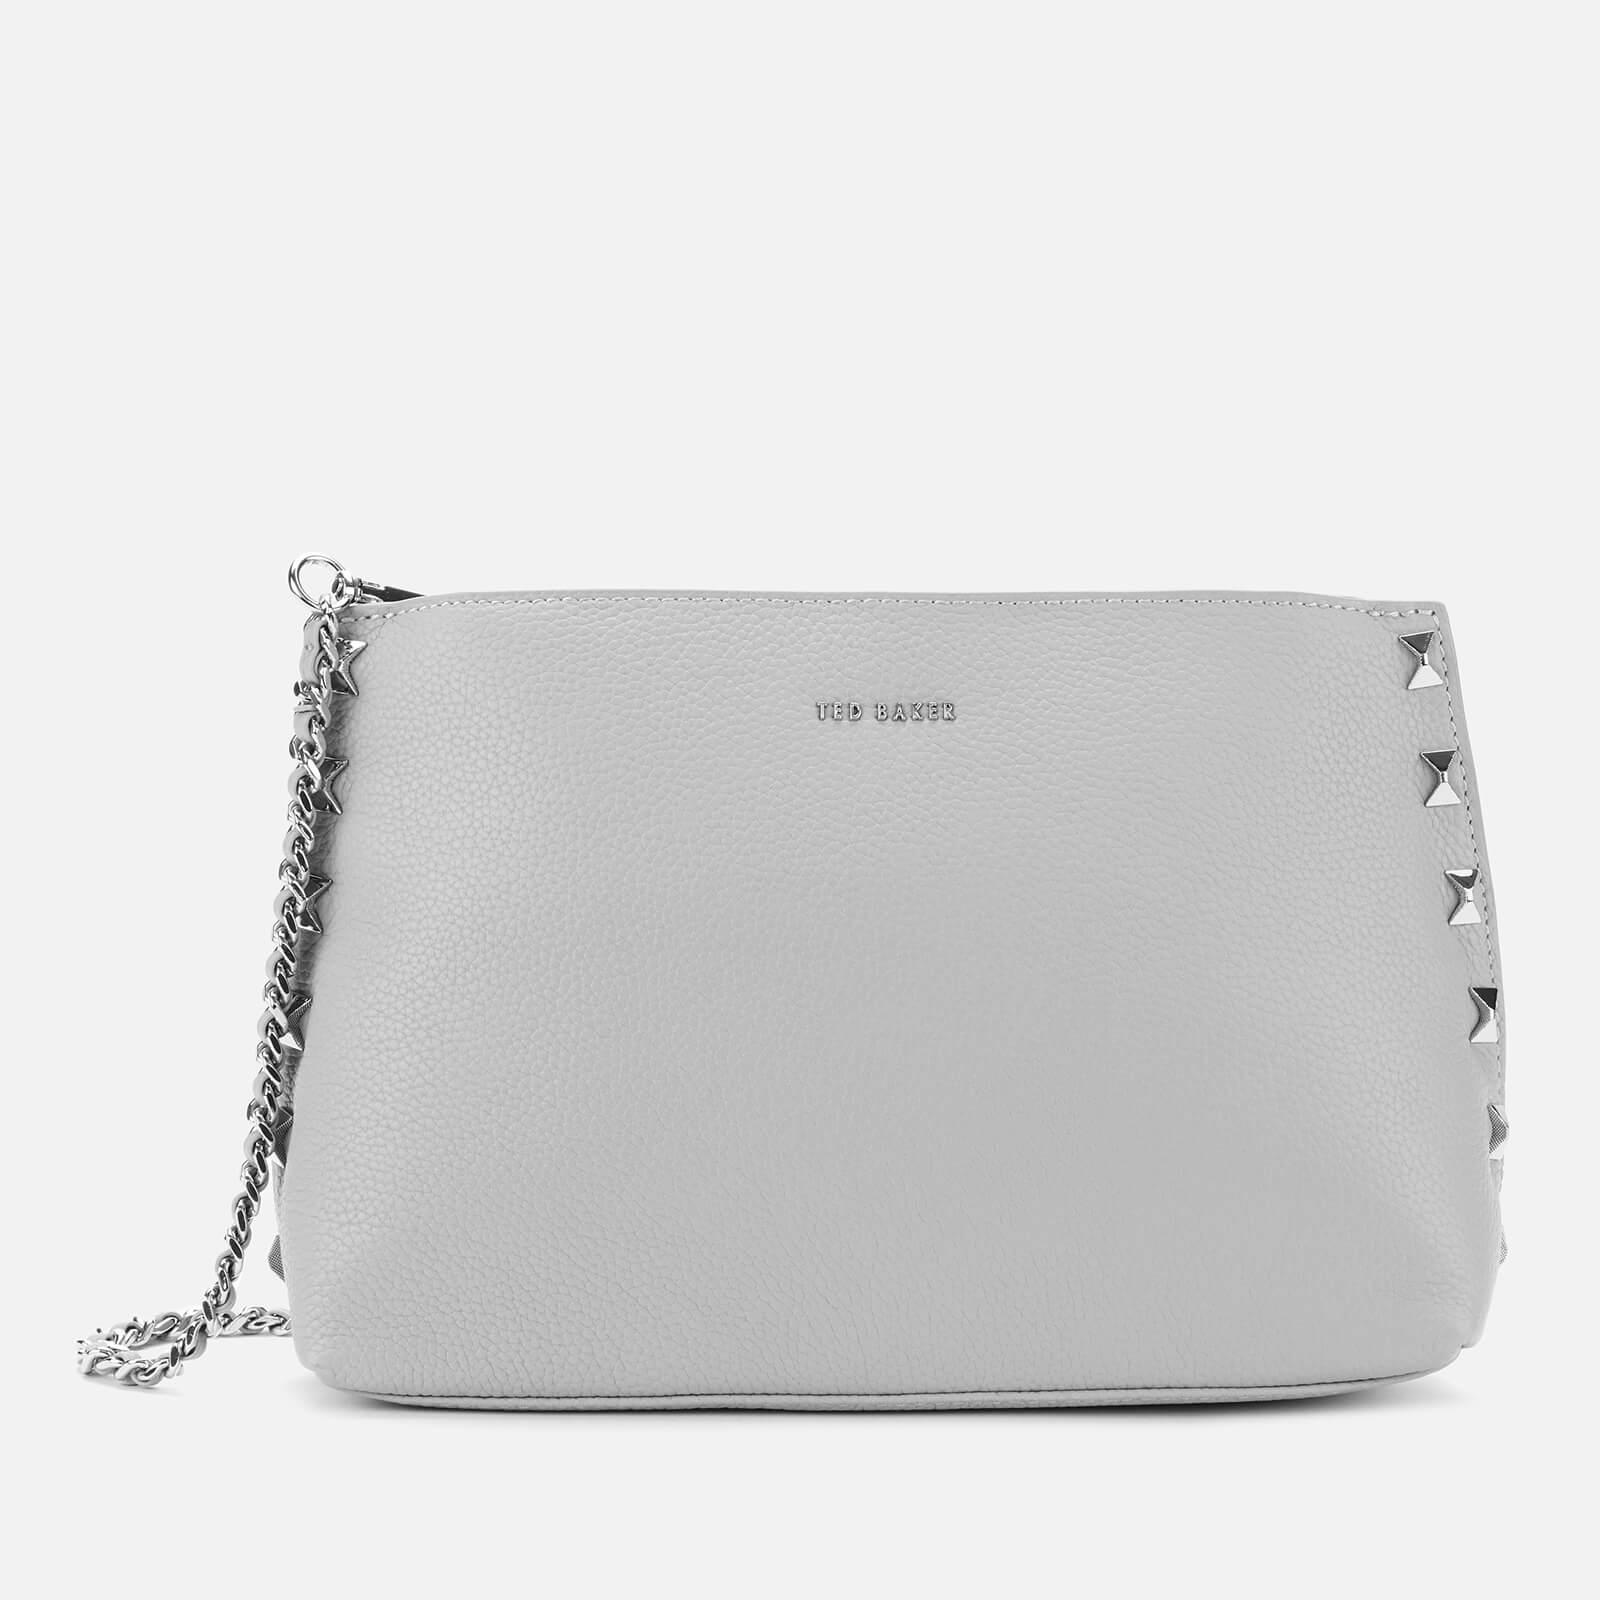 Ted Baker Leather Jemira Bow Stud Clutch Bag -light Grey in Gray - Lyst